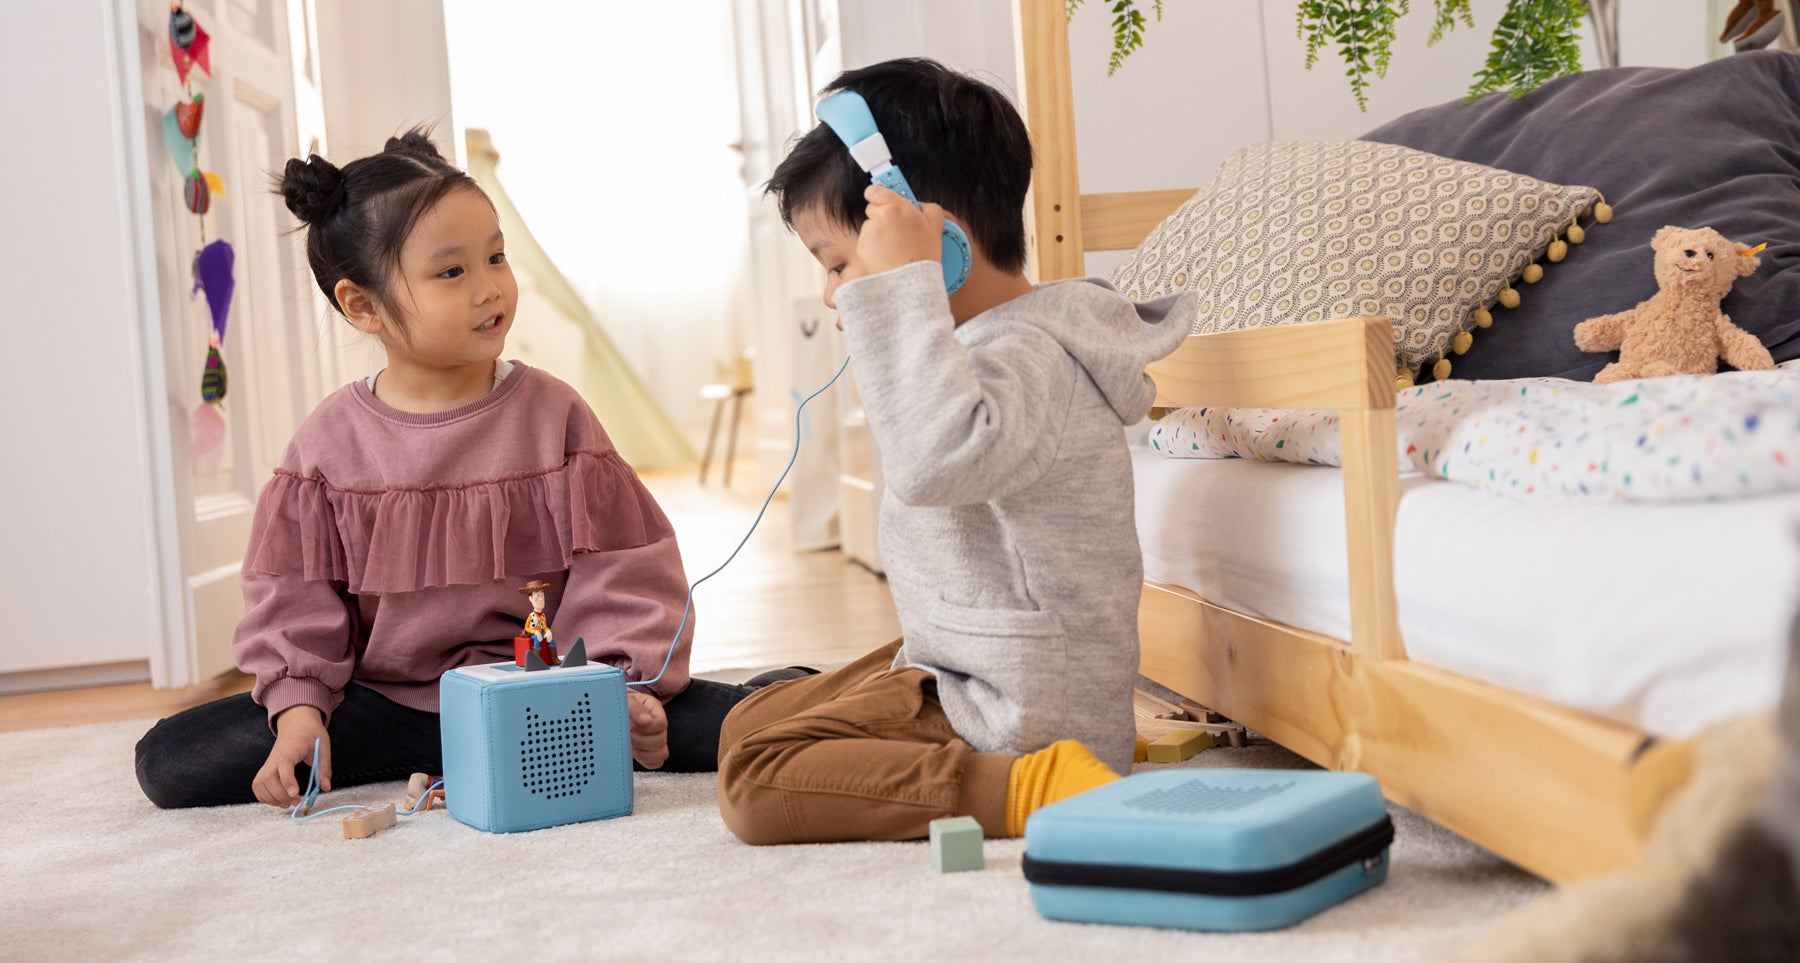 Two children listening to headphones and the blue Toniebox